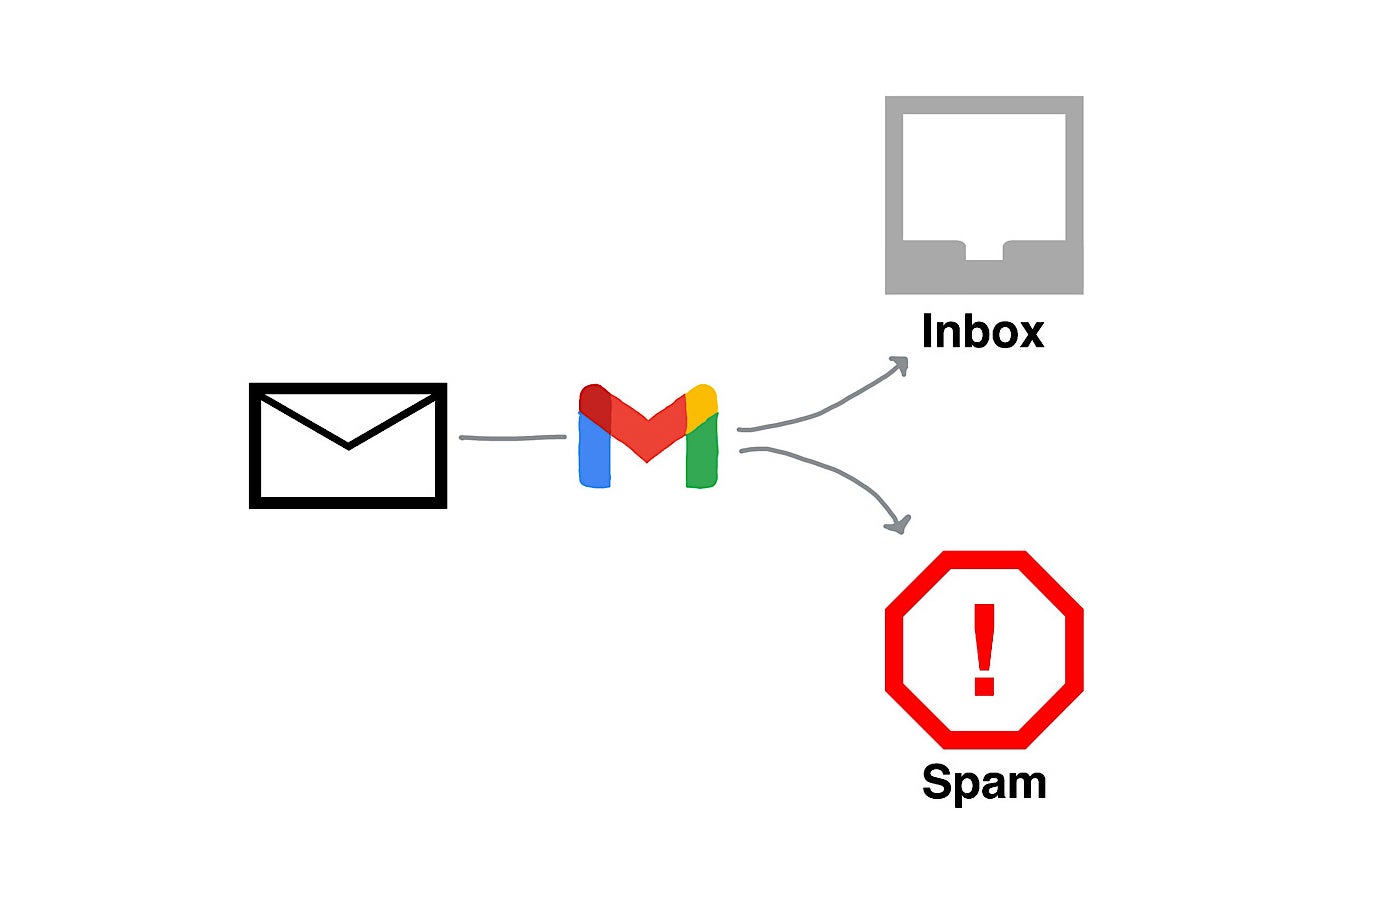 tr_20240506-google-gmail-spam-protection.jpg